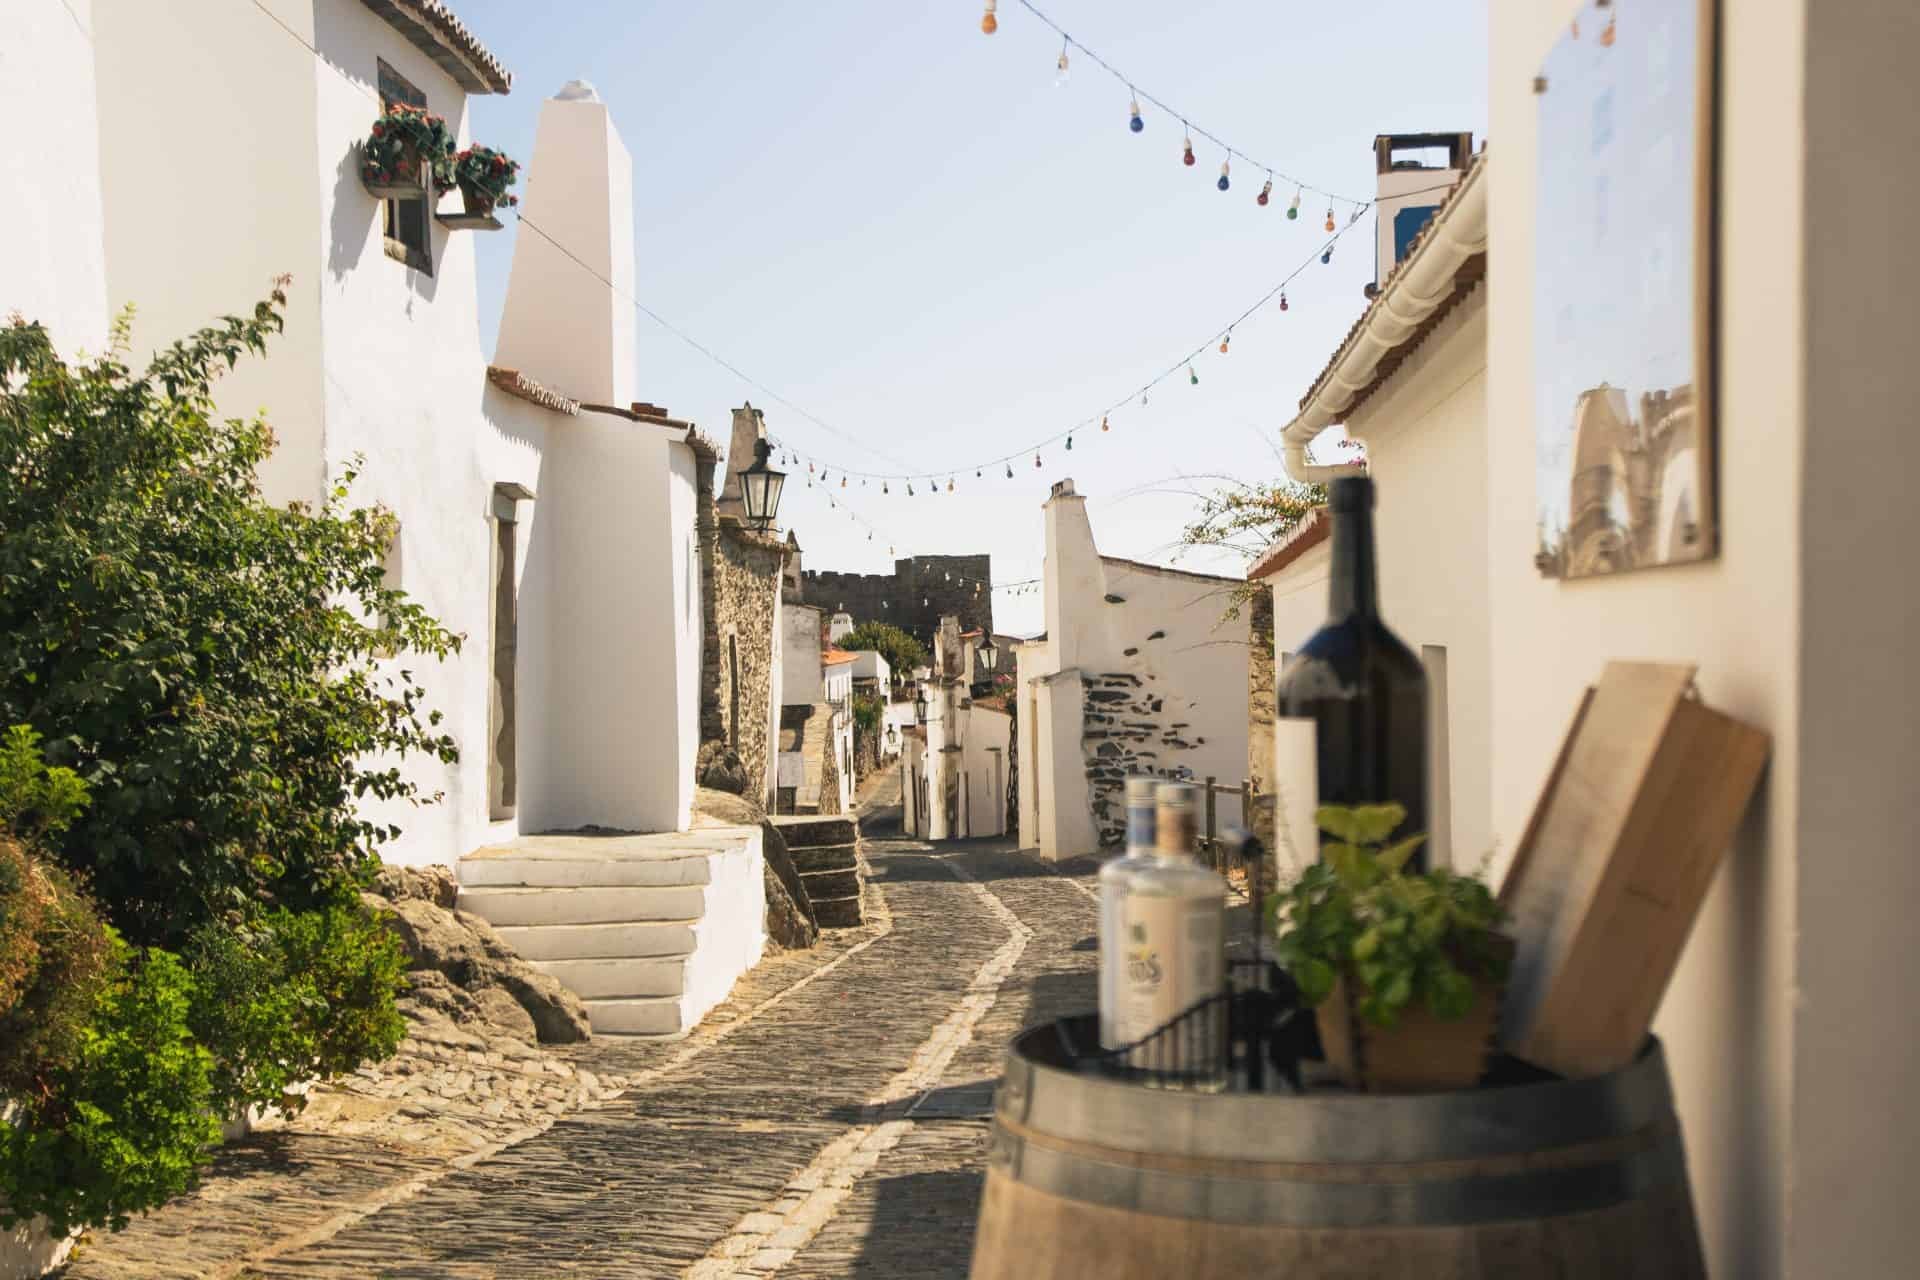 Bike Tour in Alentejo - Heritage and Wine Country